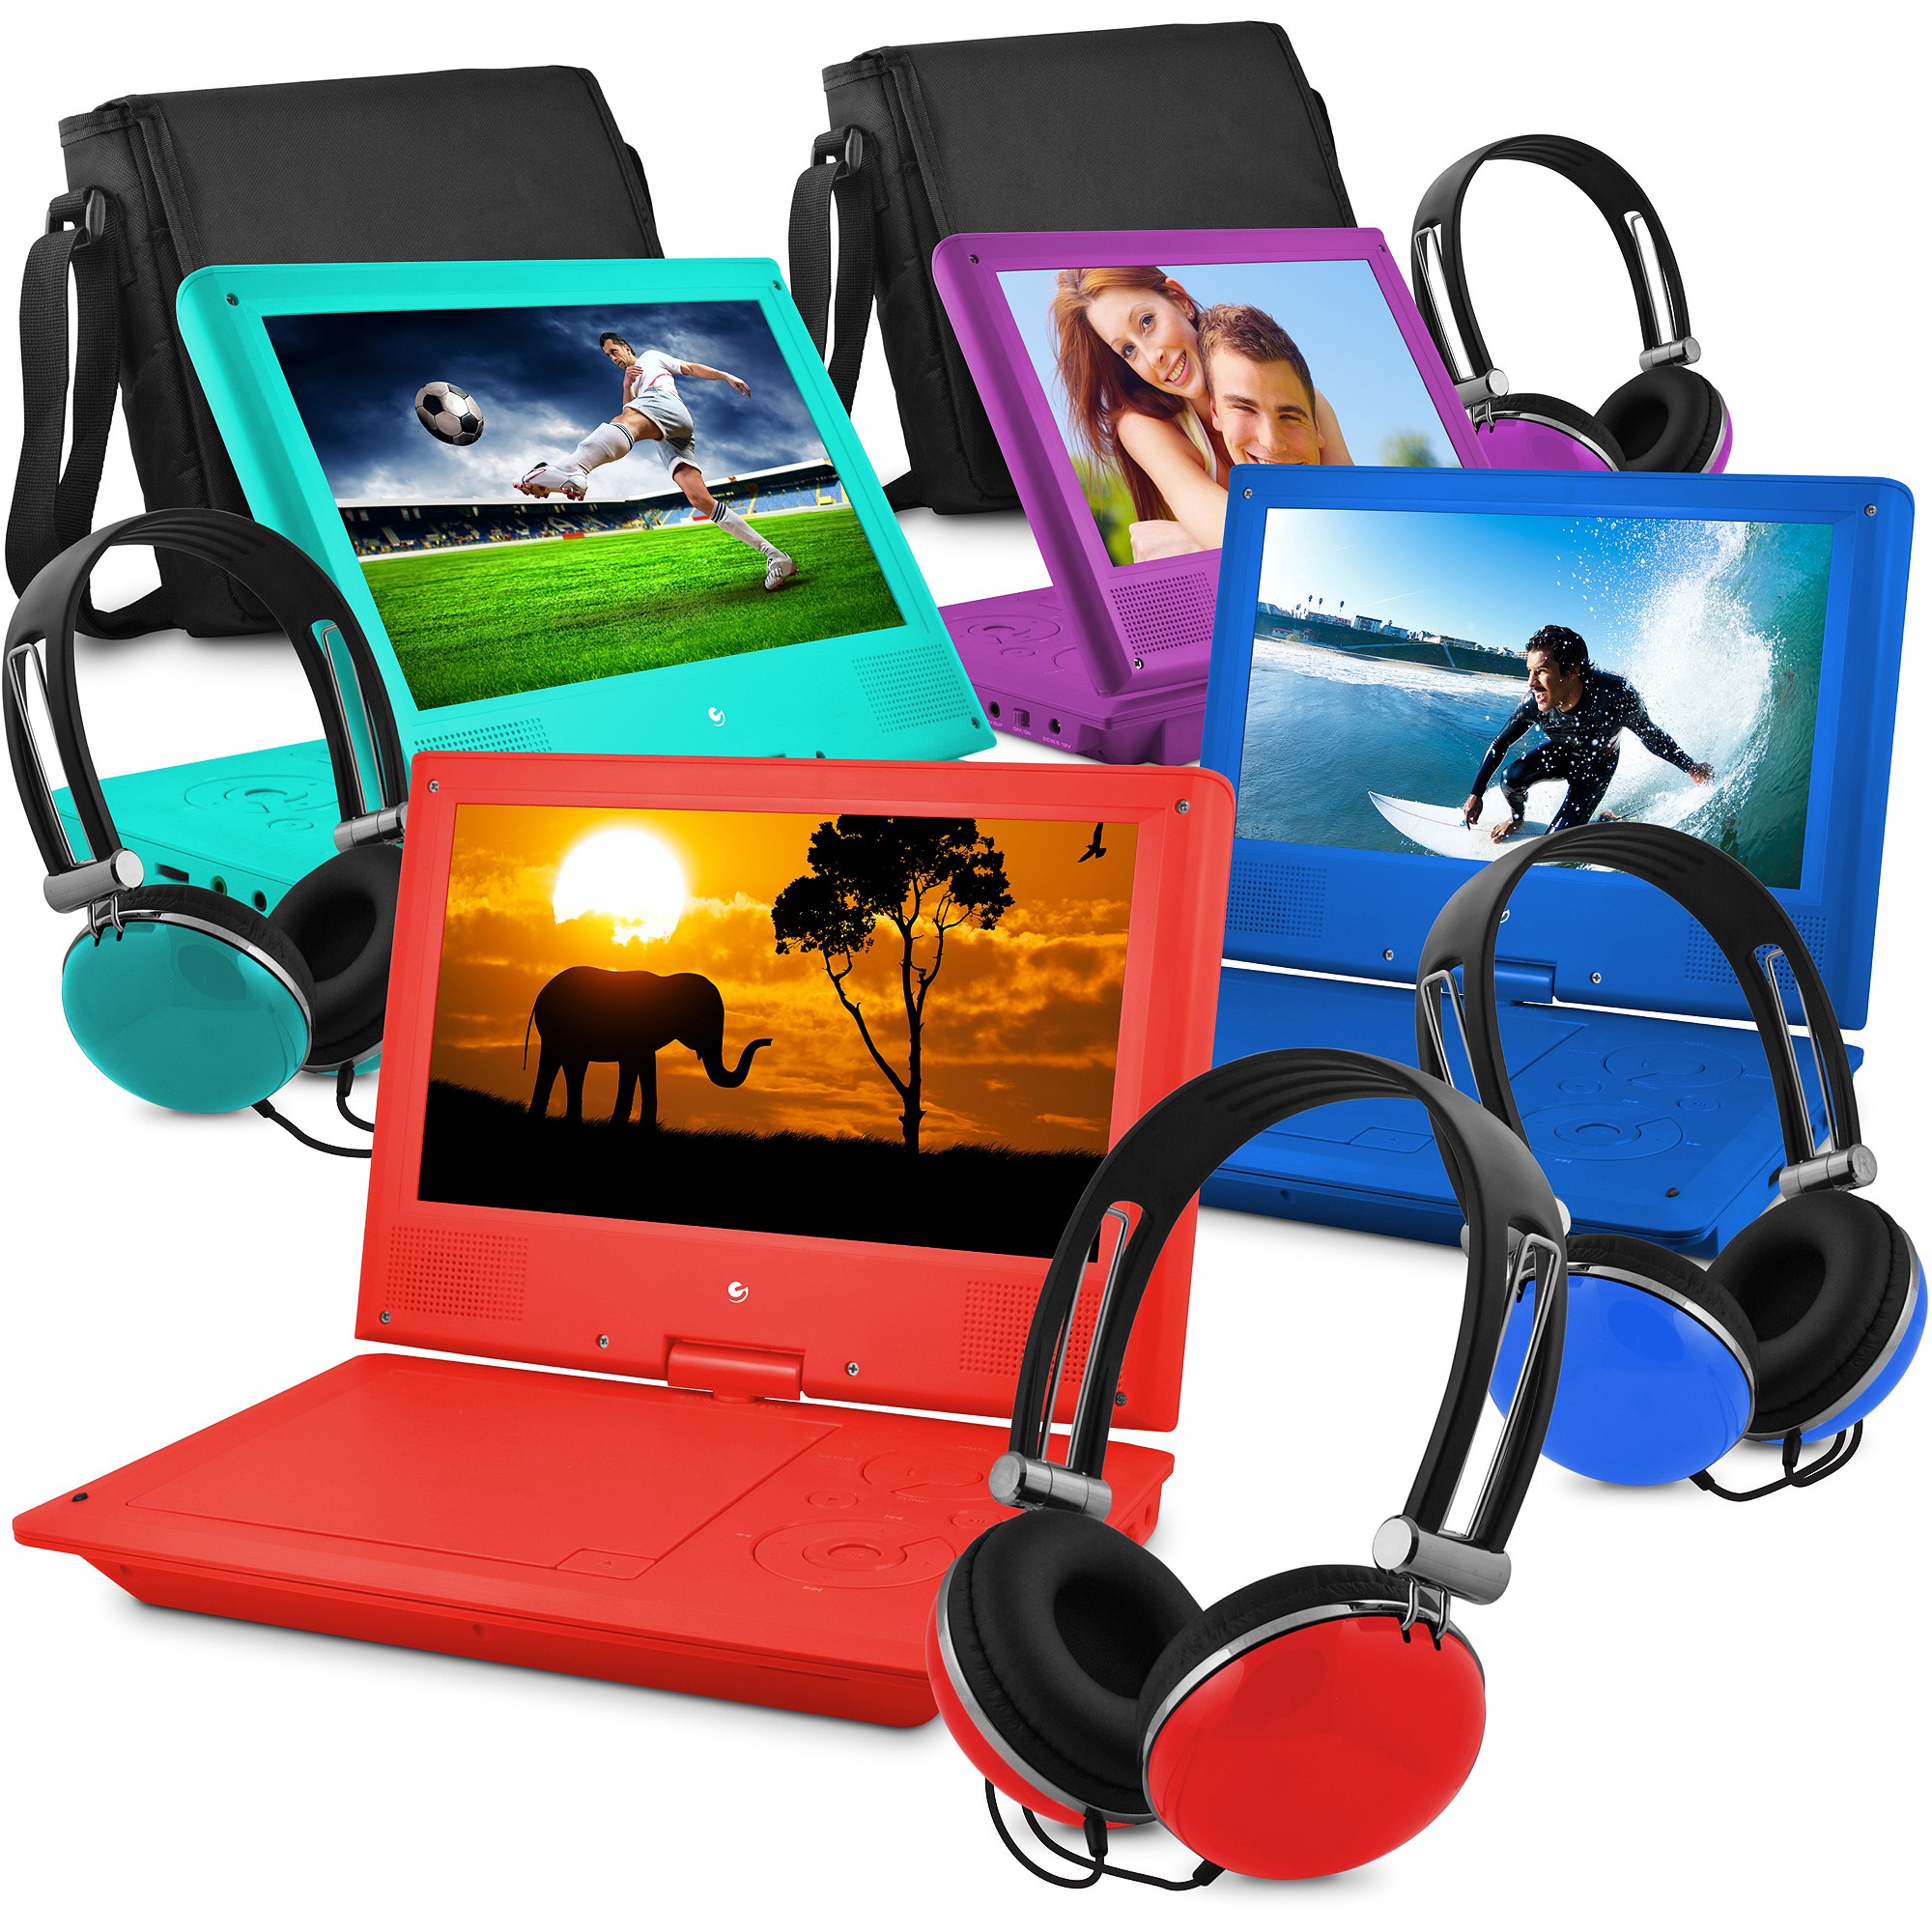 Ematic 9" Portable DVD Player with Matching Headphones and Bag - EPD909pr - image 2 of 30